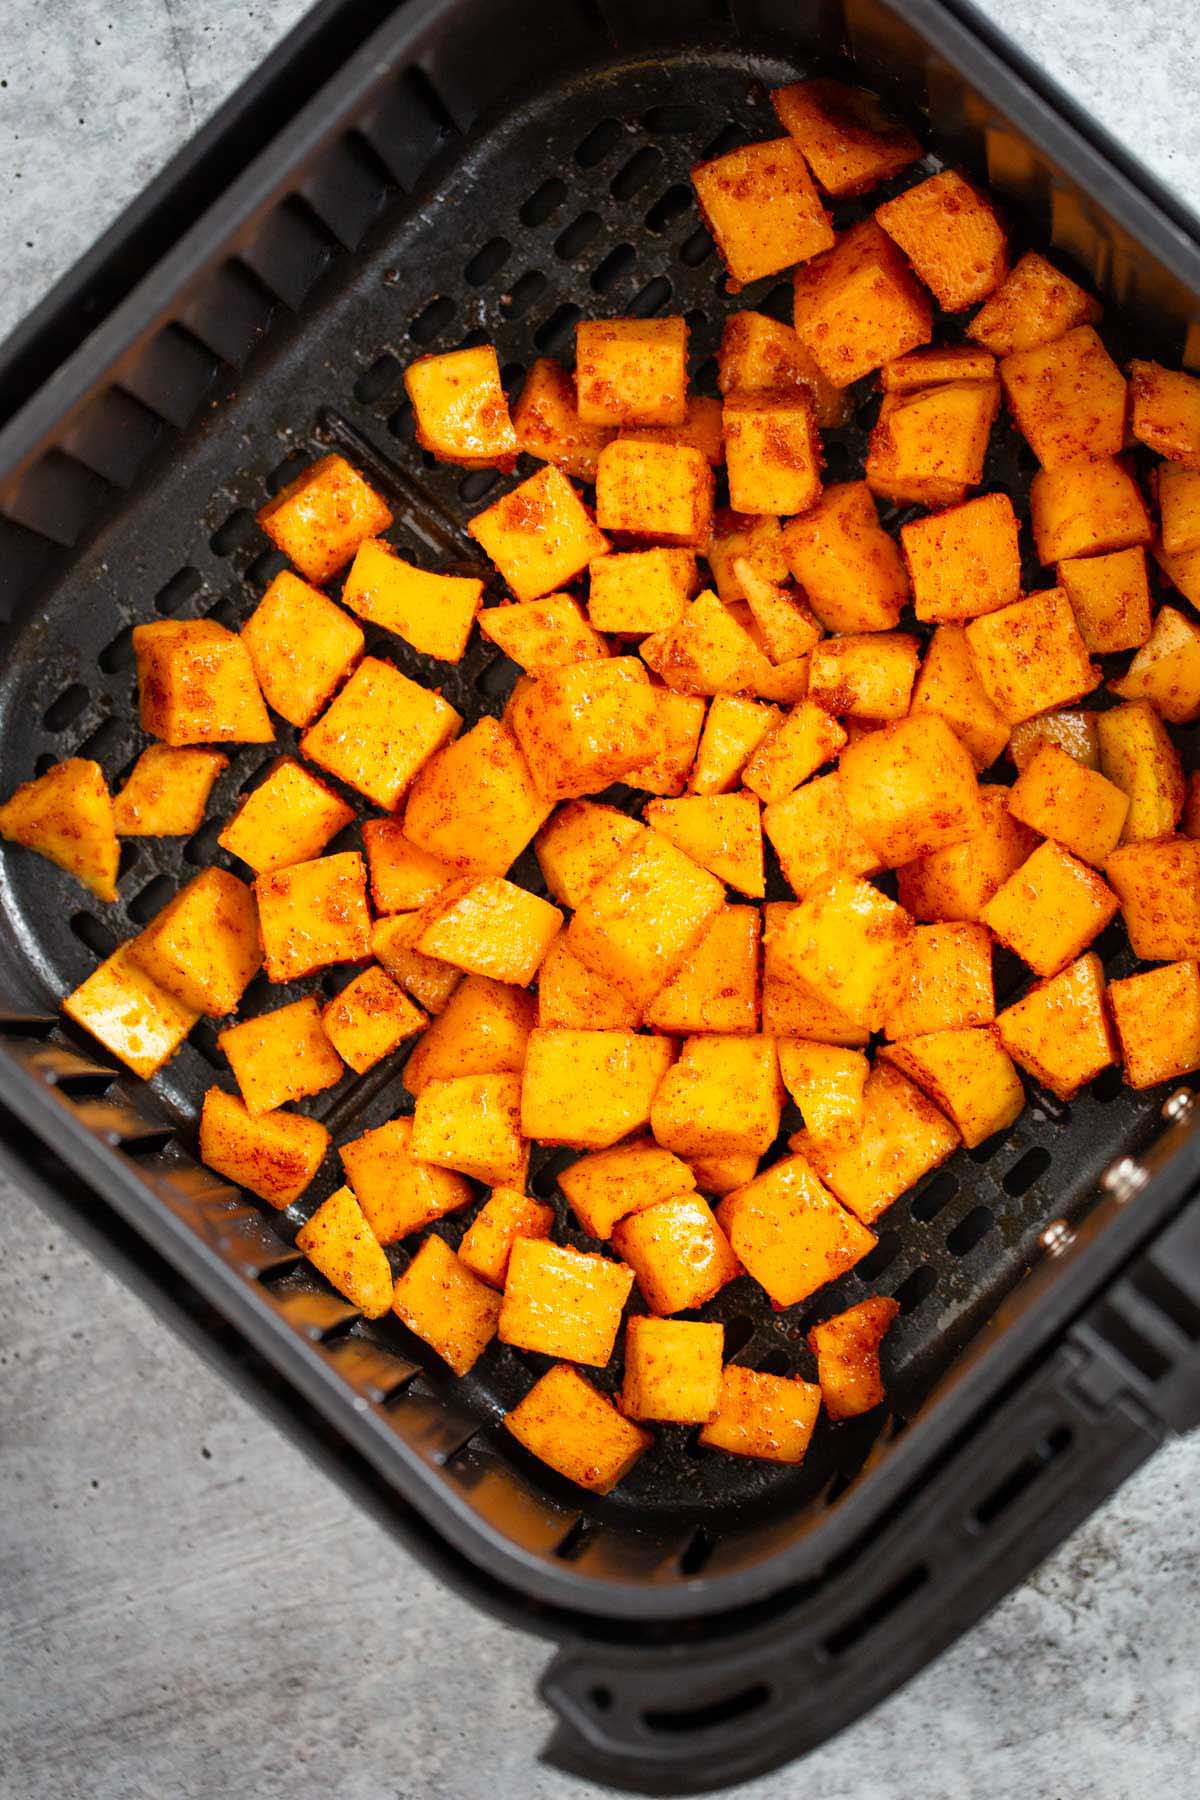 Uncooked butternut squash cubes in the air fryer basket.